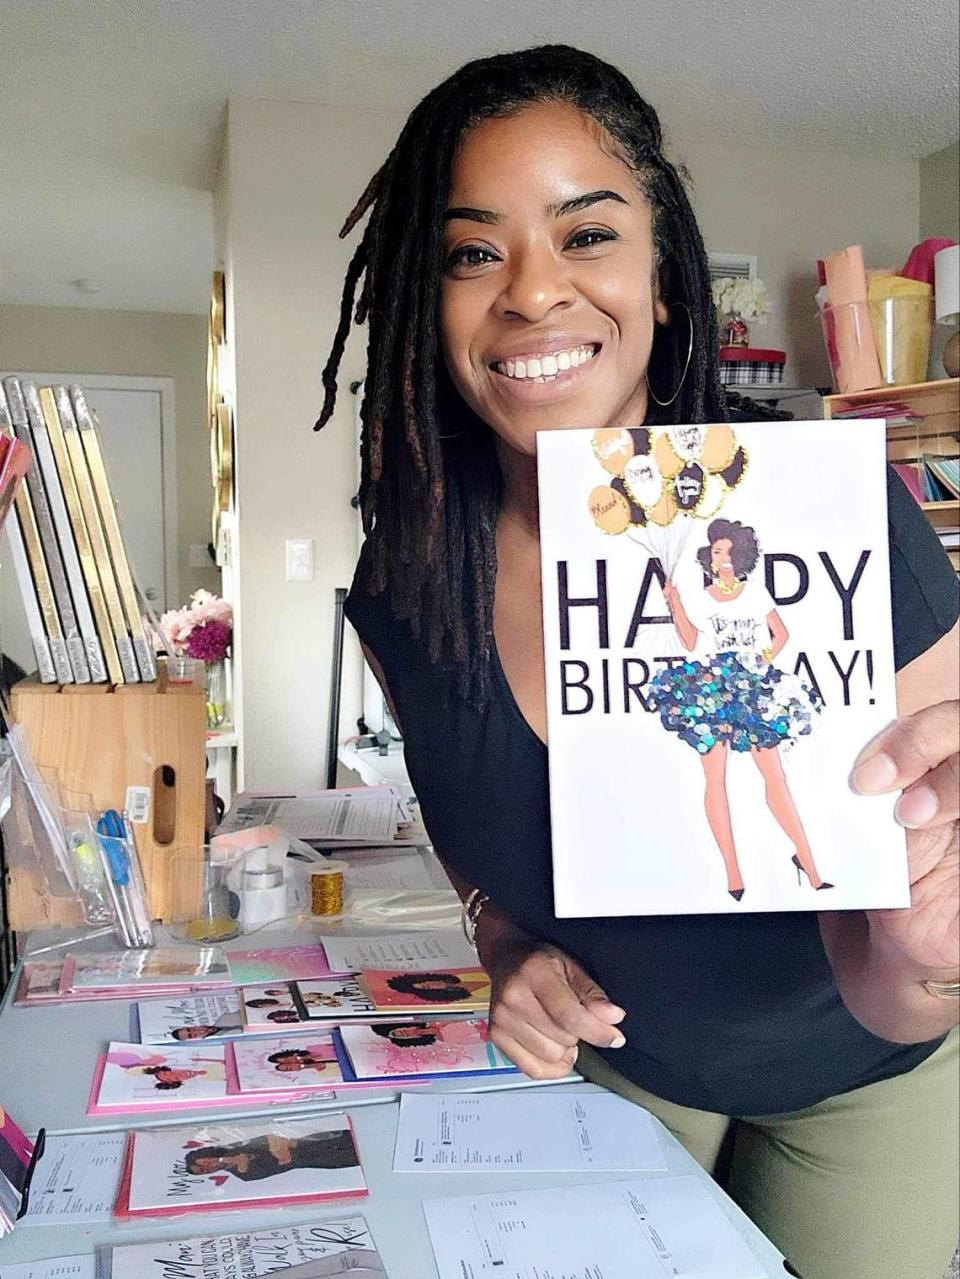 Keliah Smith, owner of CRWND Illustrations, started her company to make greeting cards and products depicting images of joyful Black people.